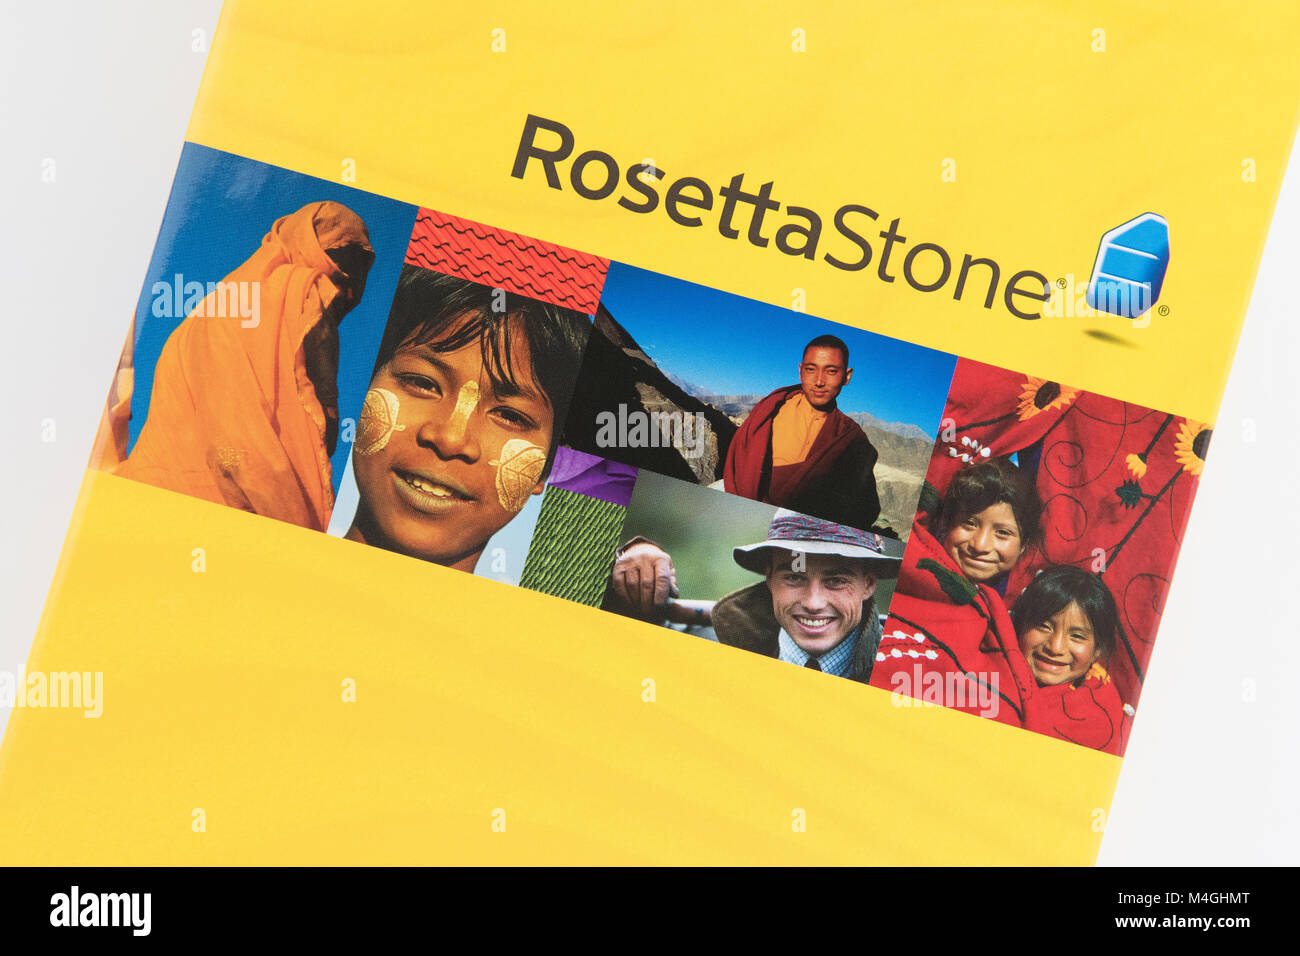 Rosetta Stone language learning software Banque D'Images